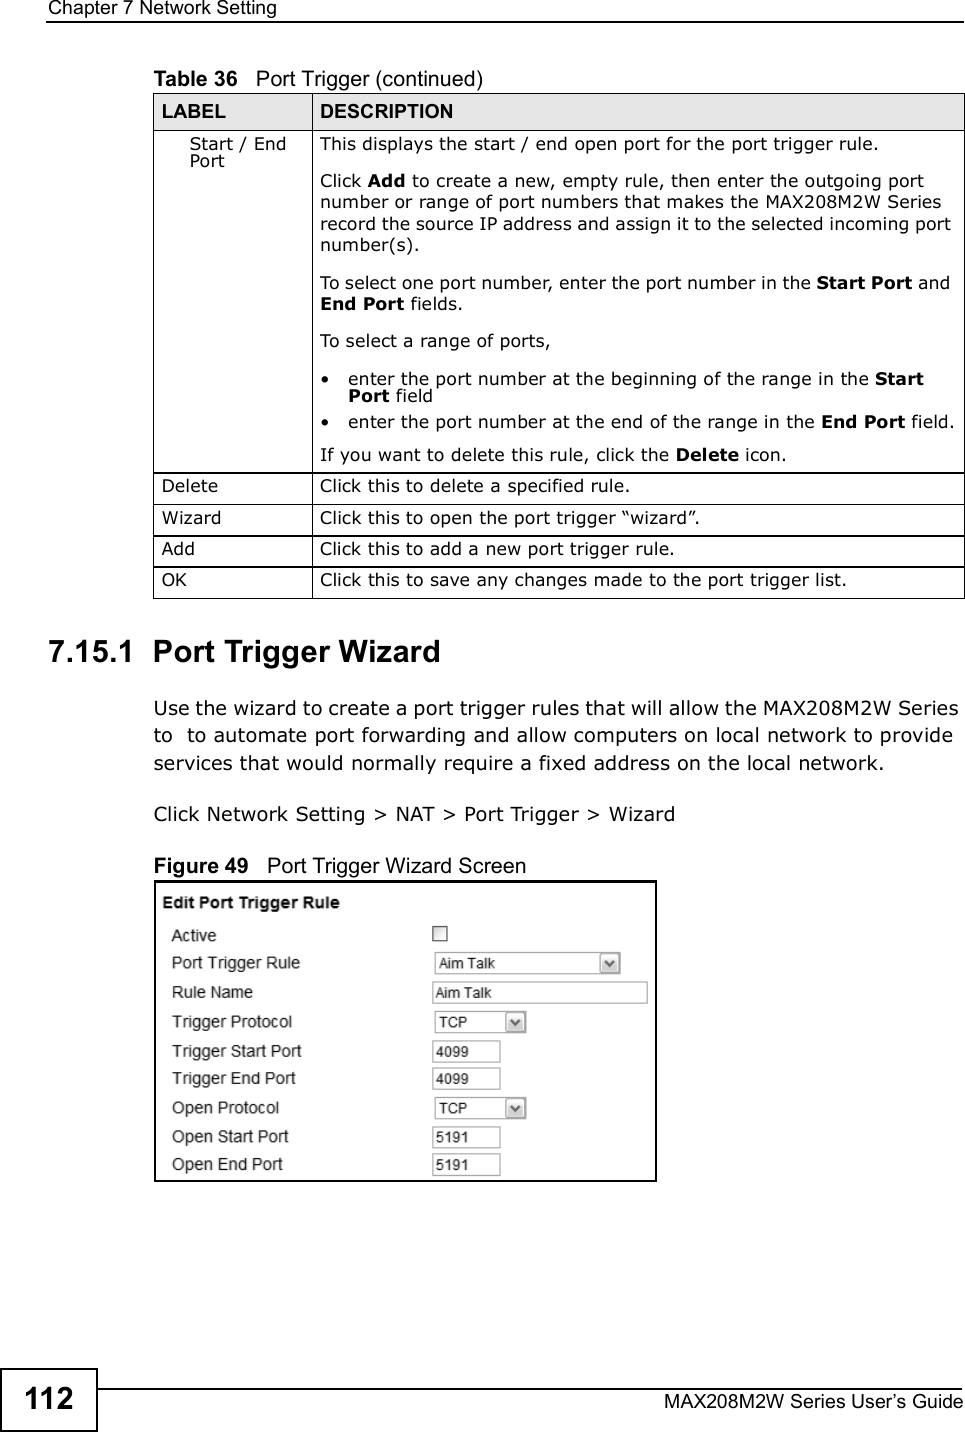 Chapter 7Network SettingMAX208M2W Series User s Guide1127.15.1  Port Trigger WizardUse the wizard to create a port trigger rules that will allow the MAX208M2W Series to  to automate port forwarding and allow computers on local network to provide services that would normally require a fixed address on the local network.Click Network Setting &gt; NAT &gt; Port Trigger &gt; WizardFigure 49   Port Trigger Wizard ScreenStart / End PortThis displays the start / end open port for the port trigger rule.Click Add to create a new, empty rule, then enter the outgoing port number or range of port numbers that makes the MAX208M2W Series record the source IP address and assign it to the selected incoming port number(s).To select one port number, enter the port number in the Start Port and End Port fields.To select a range of ports,!enter the port number at the beginning of the range in the Start Port field!enter the port number at the end of the range in the End Port field.If you want to delete this rule, click the Delete icon.DeleteClick this to delete a specified rule.WizardClick this to open the port trigger &quot;wizard#.AddClick this to add a new port trigger rule.OKClick this to save any changes made to the port trigger list.Table 36   Port Trigger (continued)LABEL DESCRIPTION